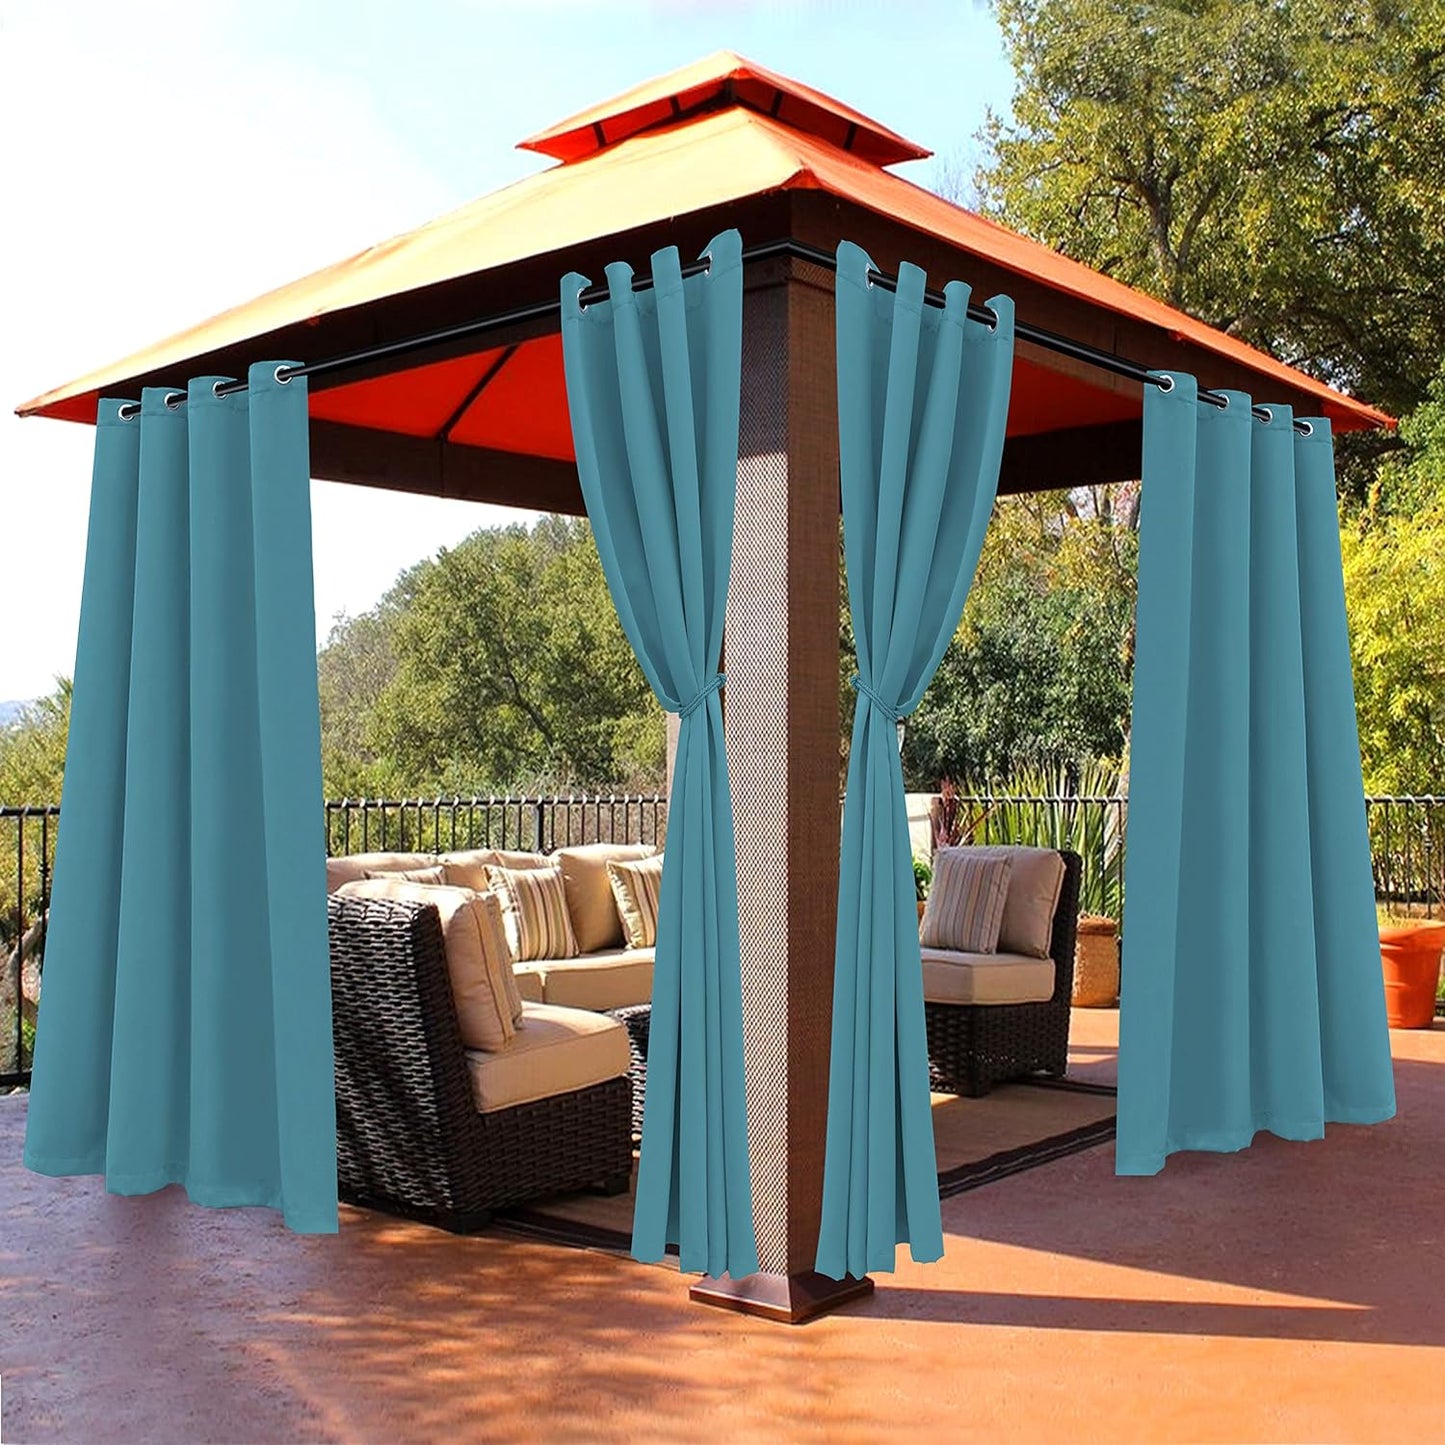 BONZER Outdoor Curtains for Patio Waterproof - Light Blocking Weather Resistant Privacy Grommet Blackout Curtains for Gazebo, Porch, Pergola, Cabana, Deck, Sunroom, 1 Panel, 52W X 84L Inch, Silver  BONZER Teal 52W X 108 Inch 